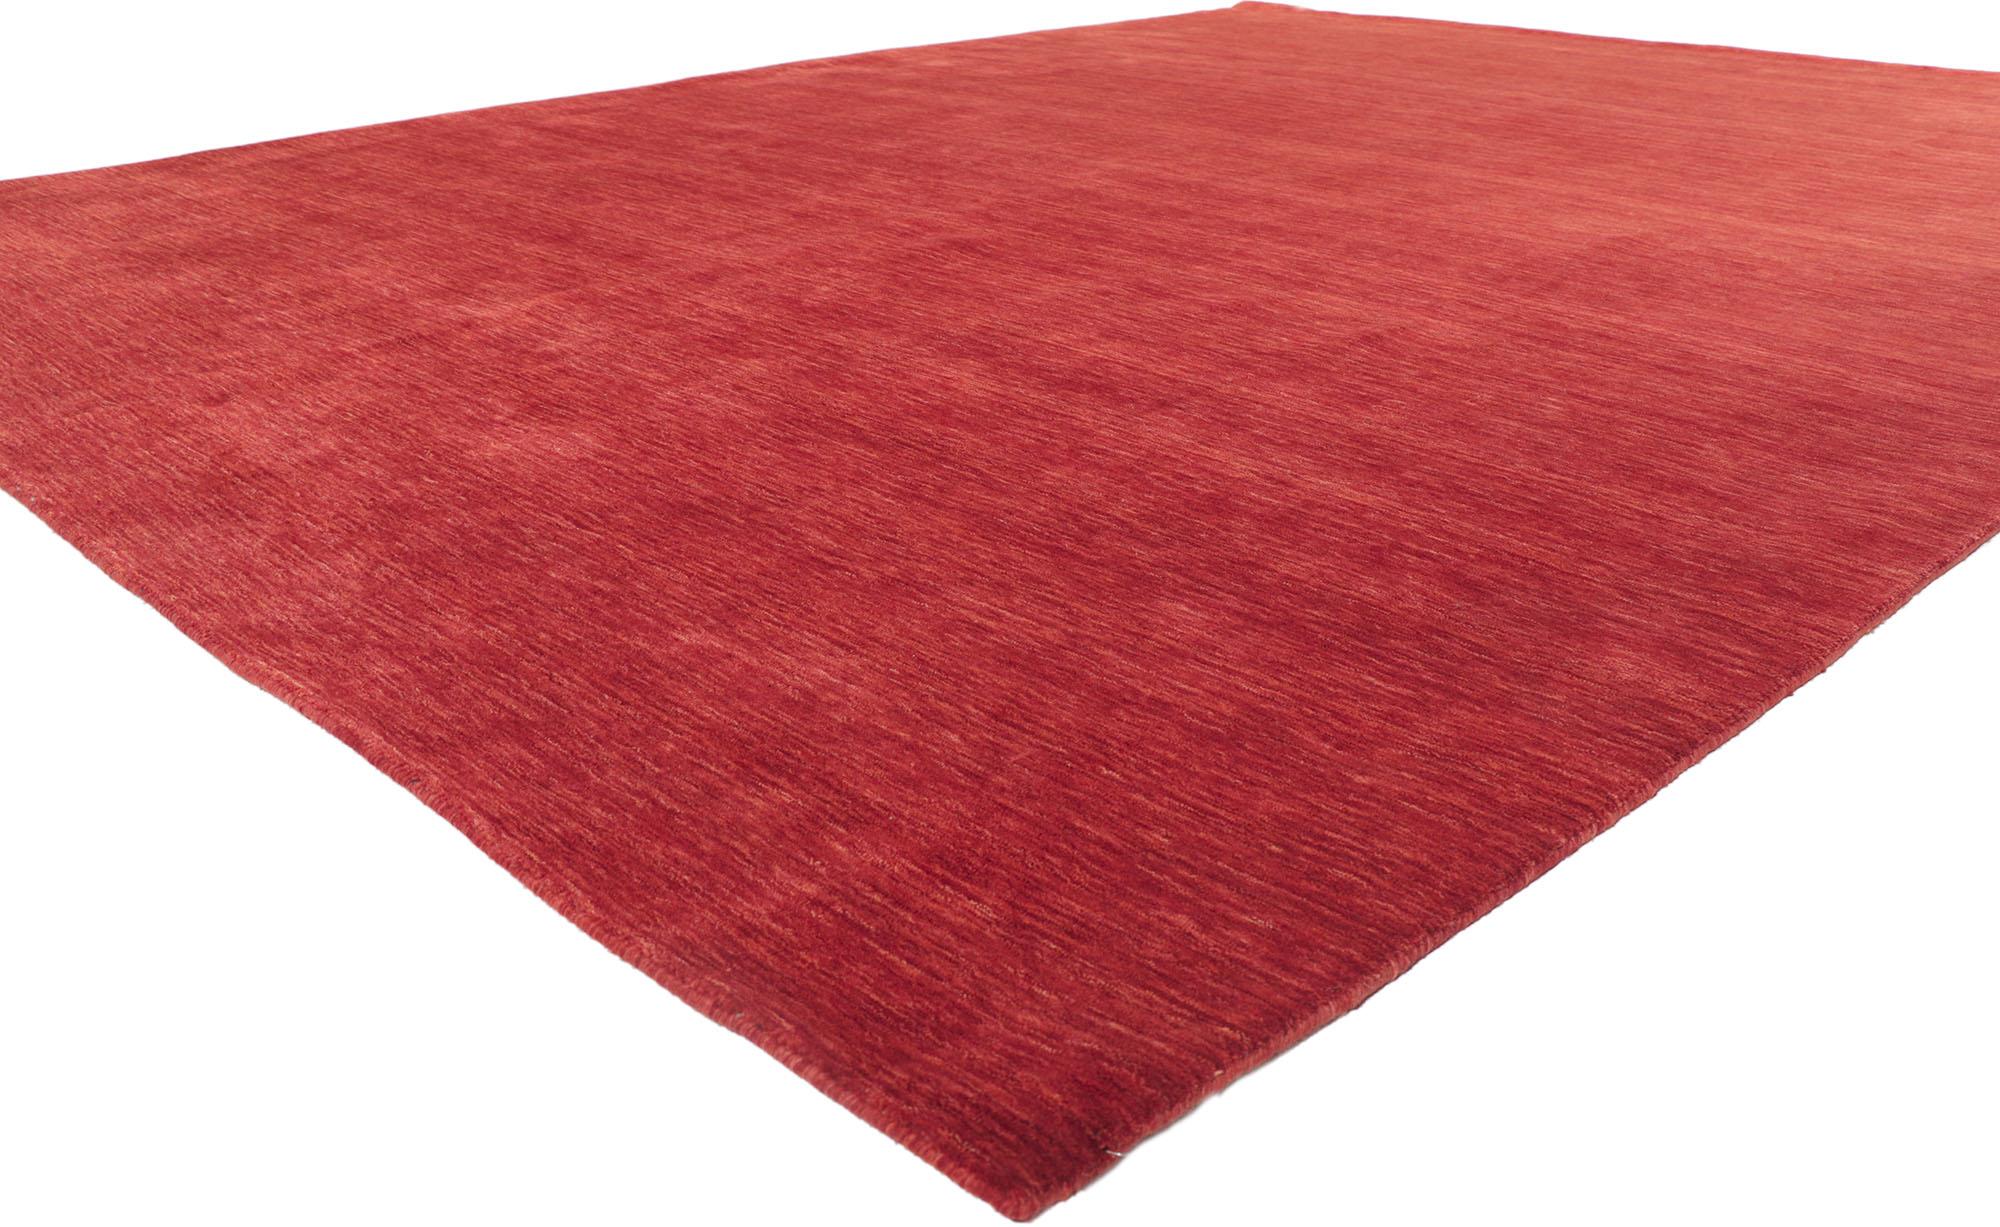 30730 New contemporary red area rug with modern style 09'10 x 12'10. Effortless, elegant, and casual meets the eye in this contemporary Indian area rug. It features gorgeous red hues and softly gradated striations running selvage to selvage blending